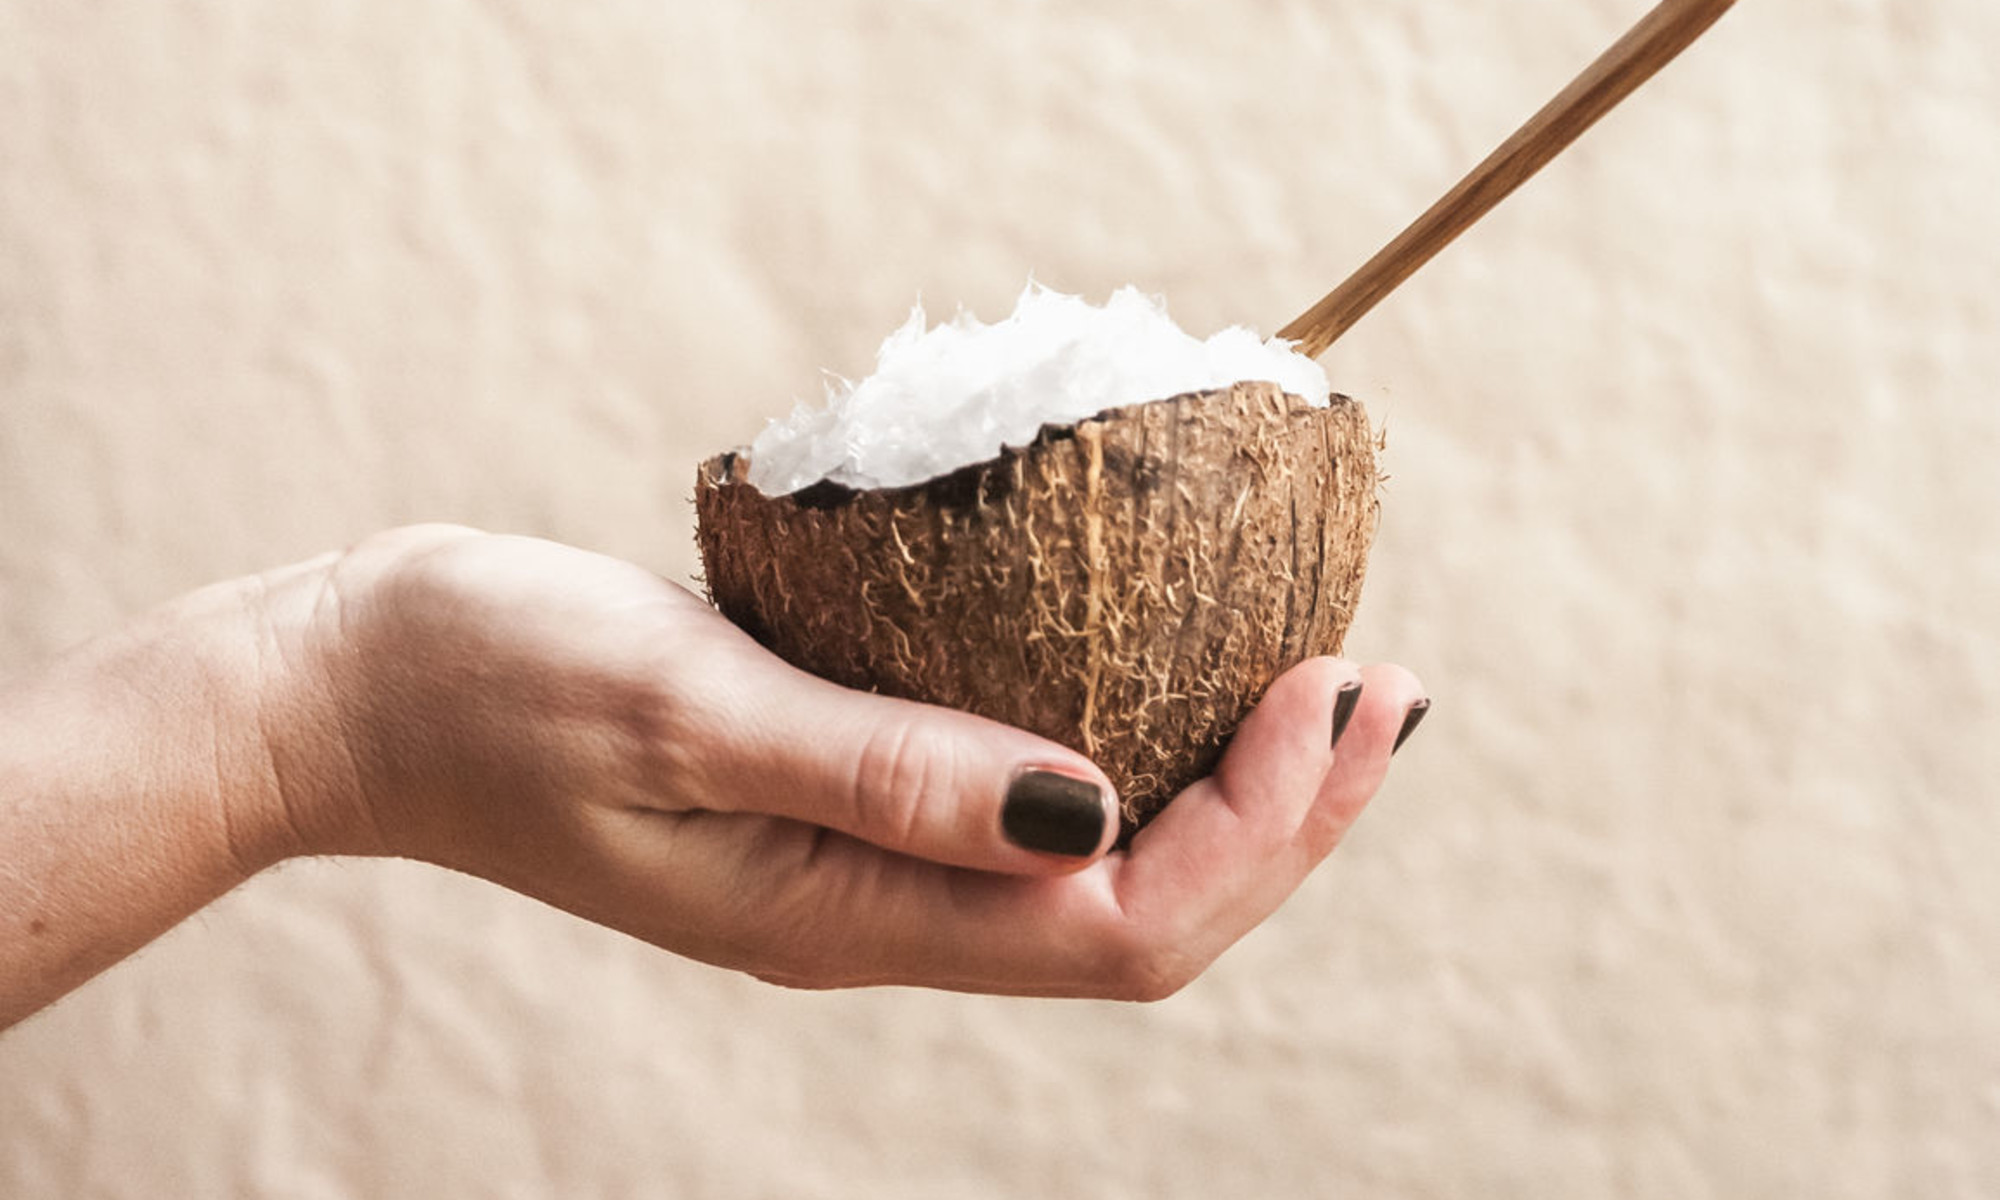 Coconut Oil As Lube Benefits, Risks and How To Use It mindbodygreen picture picture photo